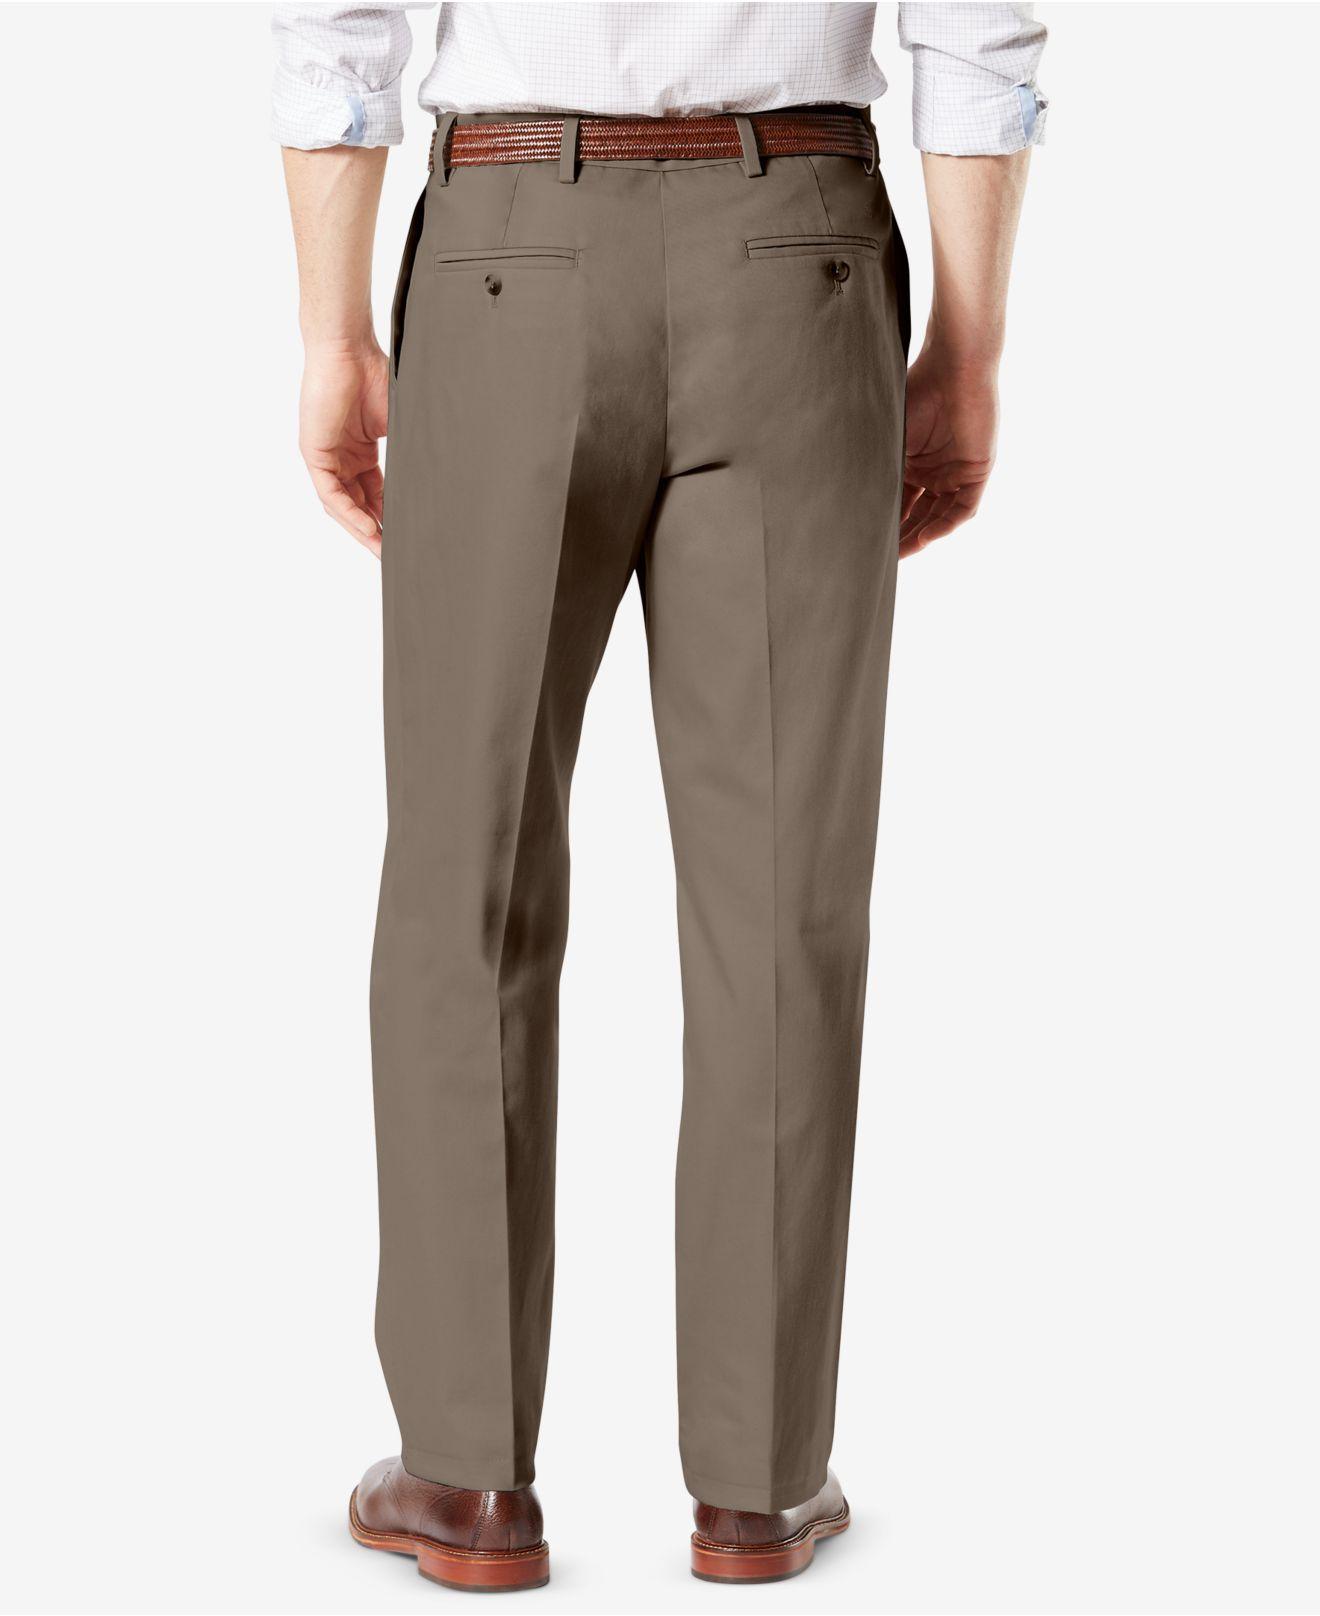 Dockers Mens Signature Khaki Classic Fit Pleated Lux Cotton Pants Brown $62 NWT